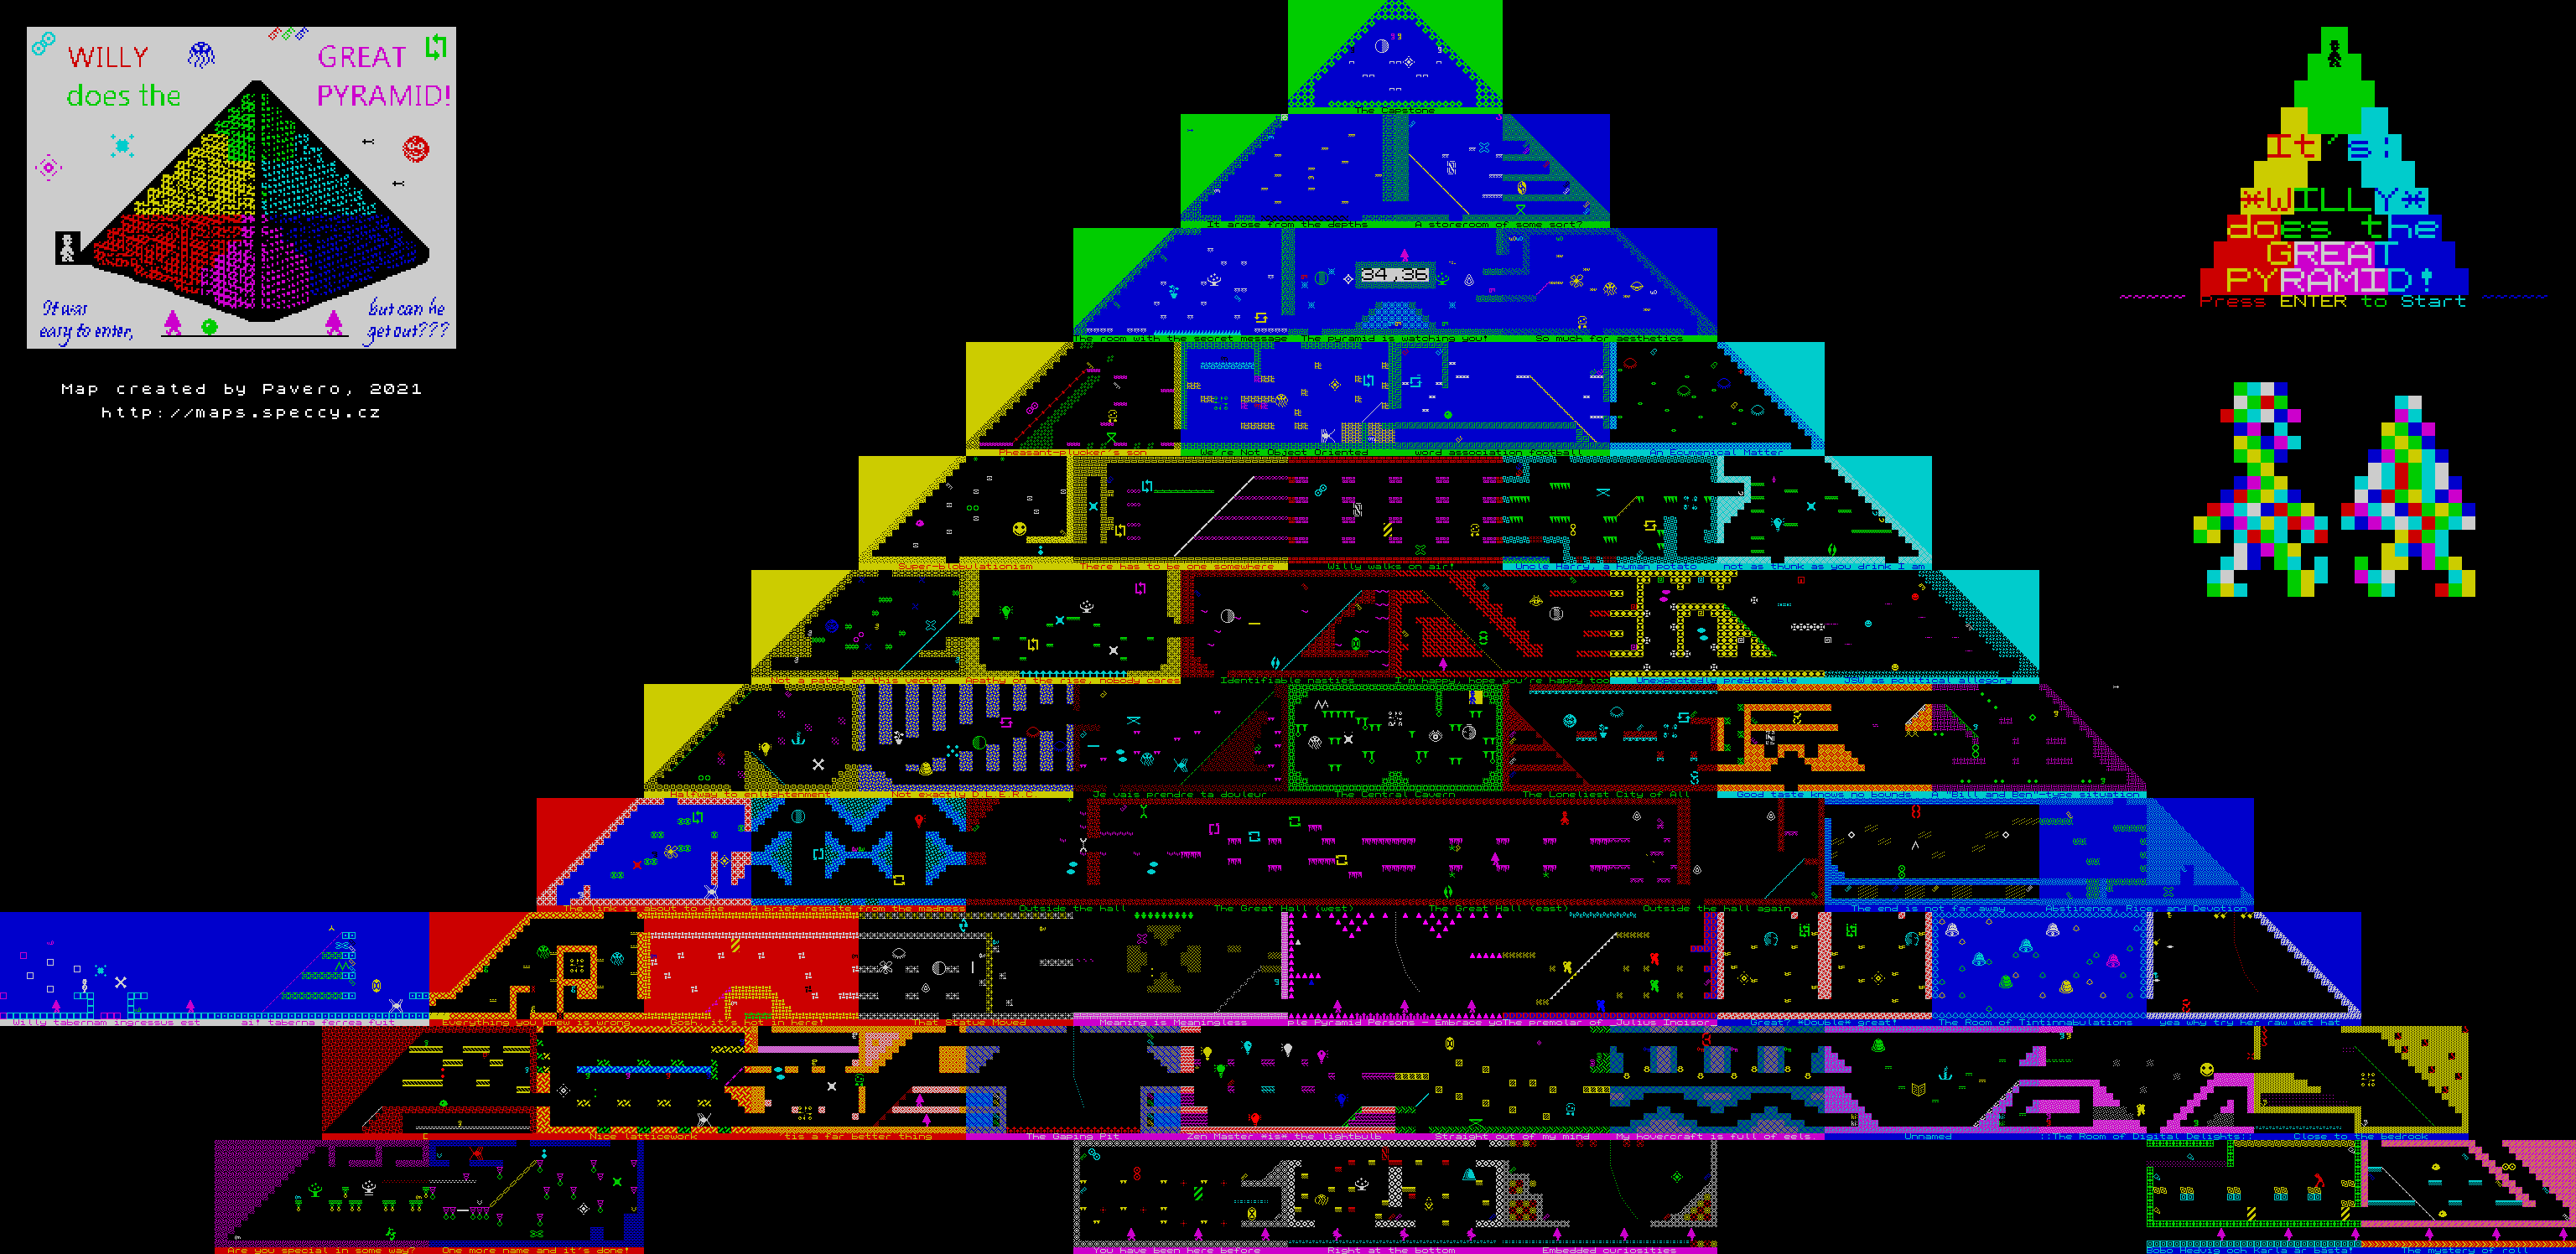 Willy Does the Great Pyramid - The Map